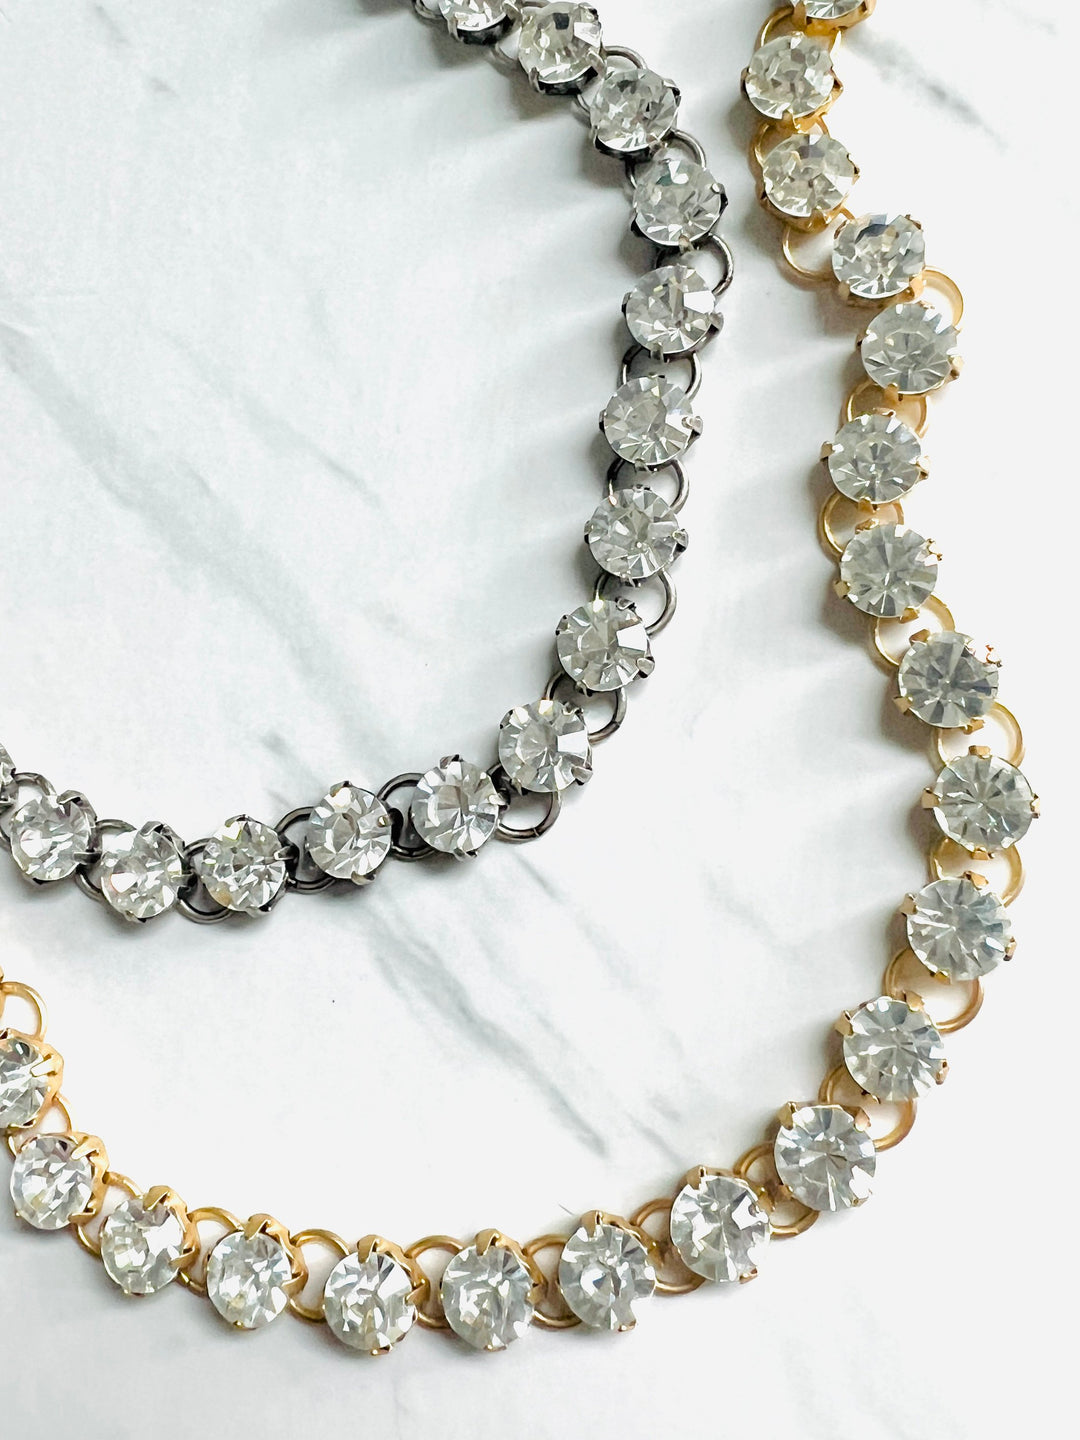 Mimi Swarovski Crystal Choker Necklace in Antique Silver and Matte Gold